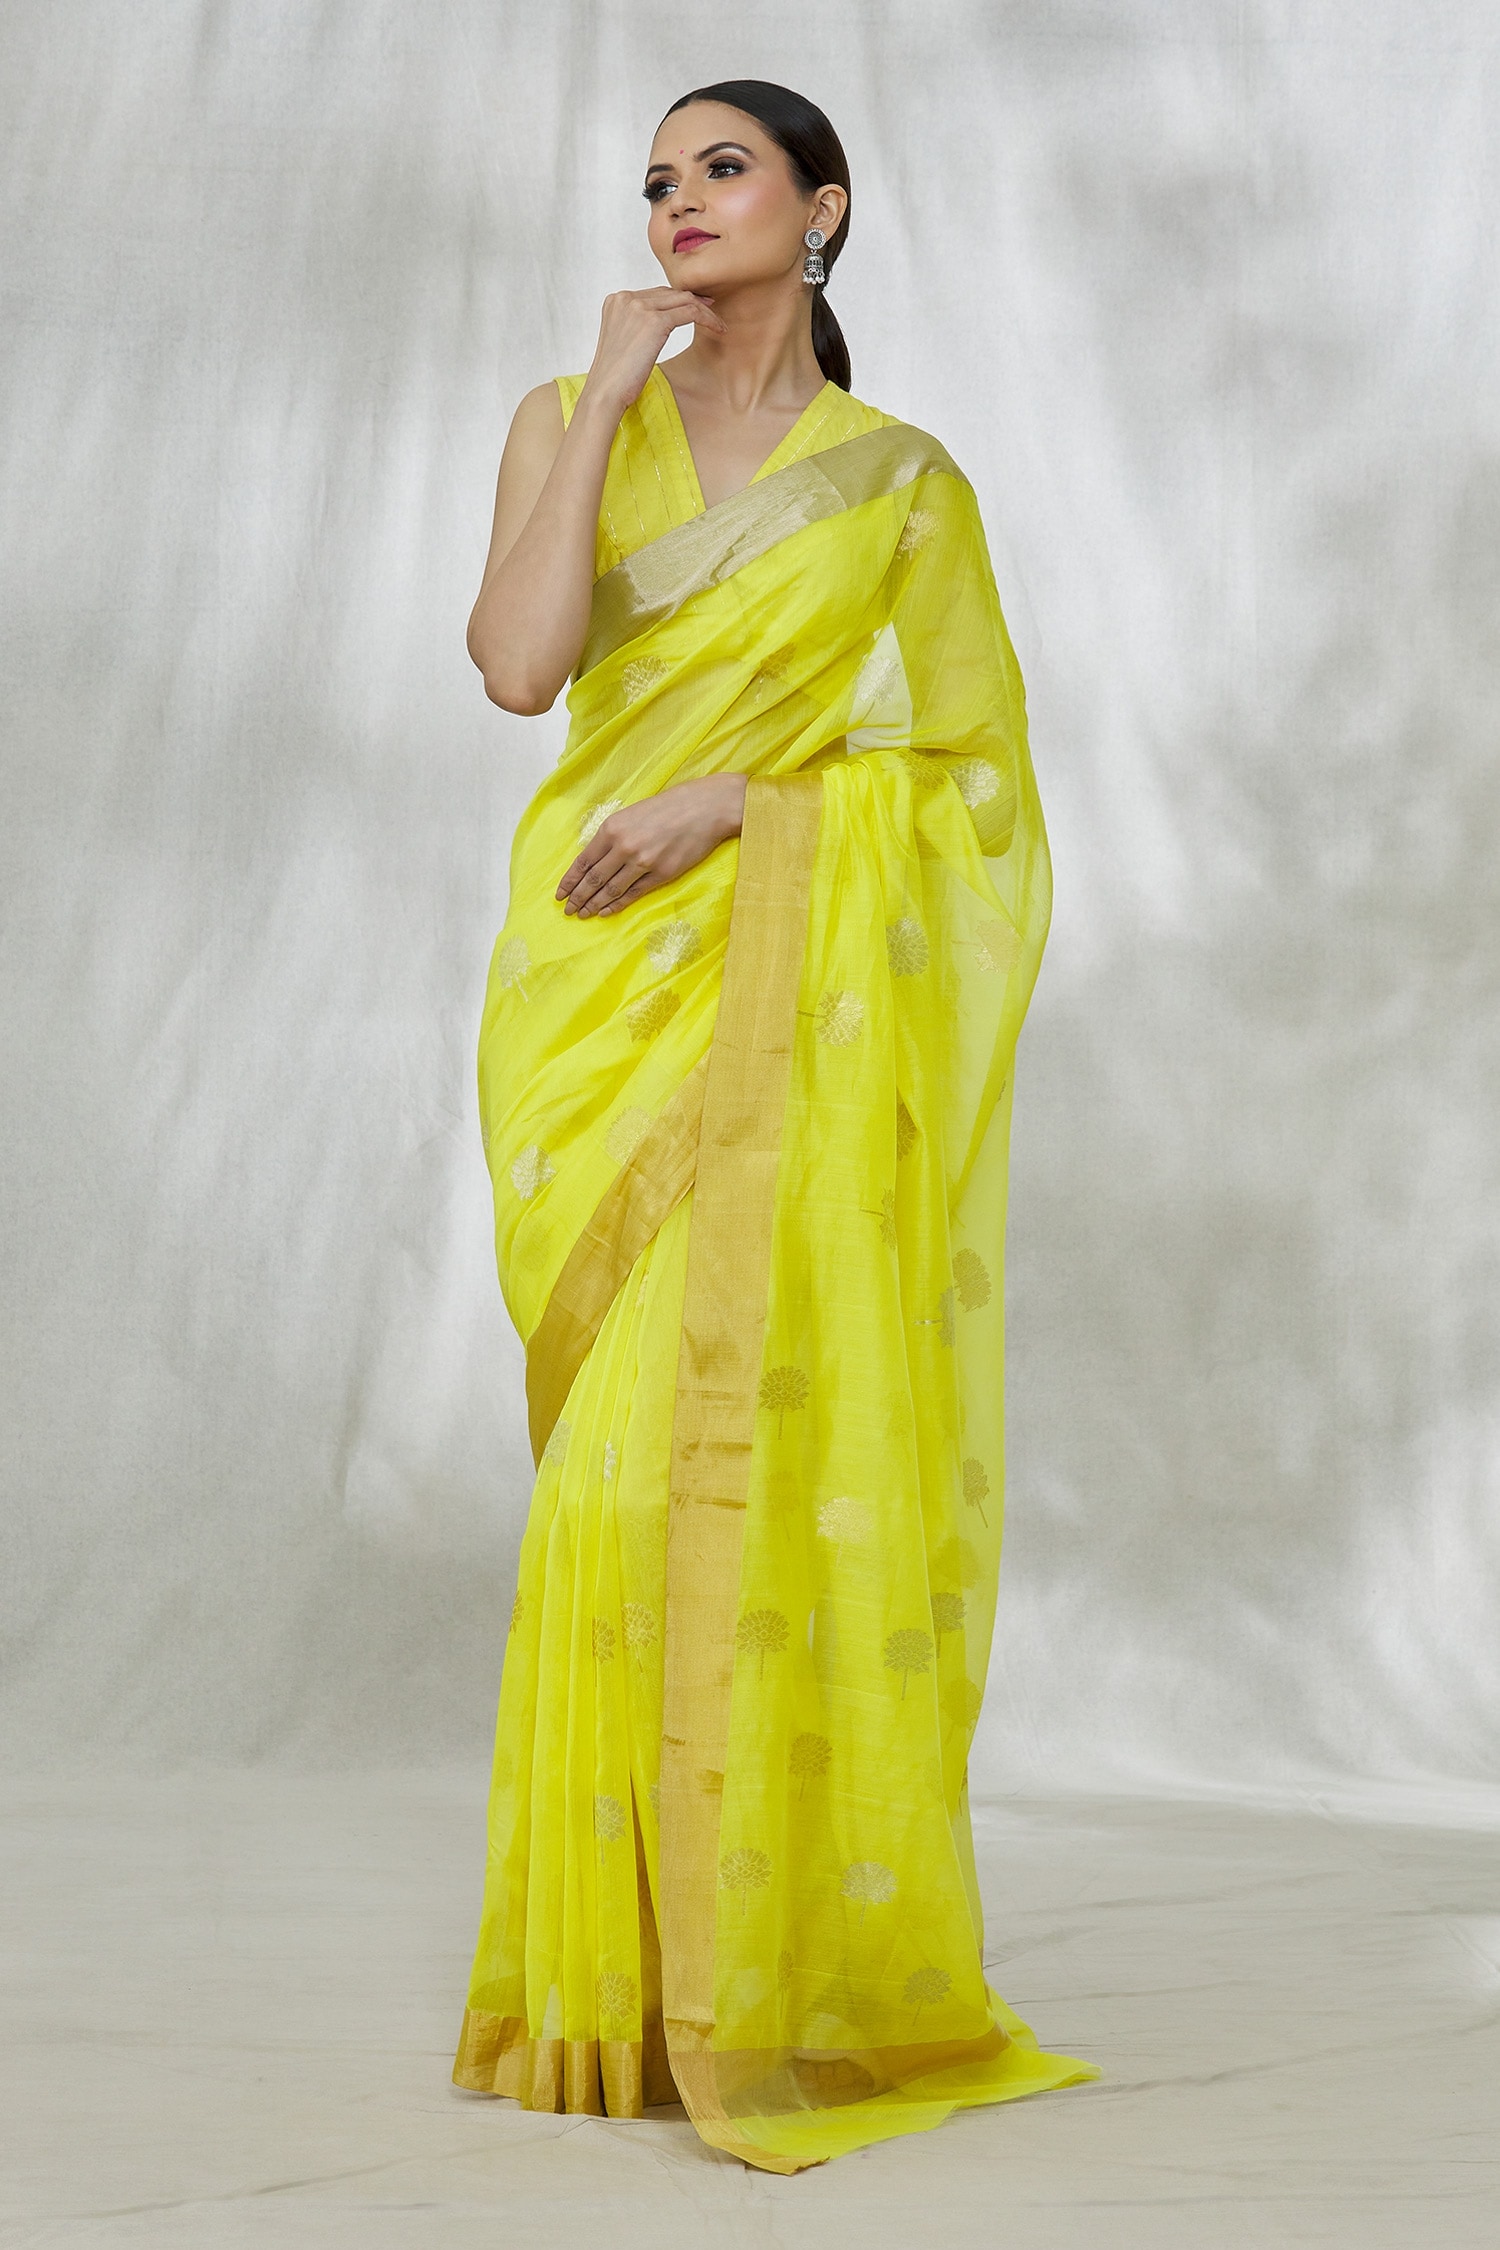 Yellow Saree with contrast Aqua blue blouse | Combination dresses,  Combination blouses, Saree wearing styles